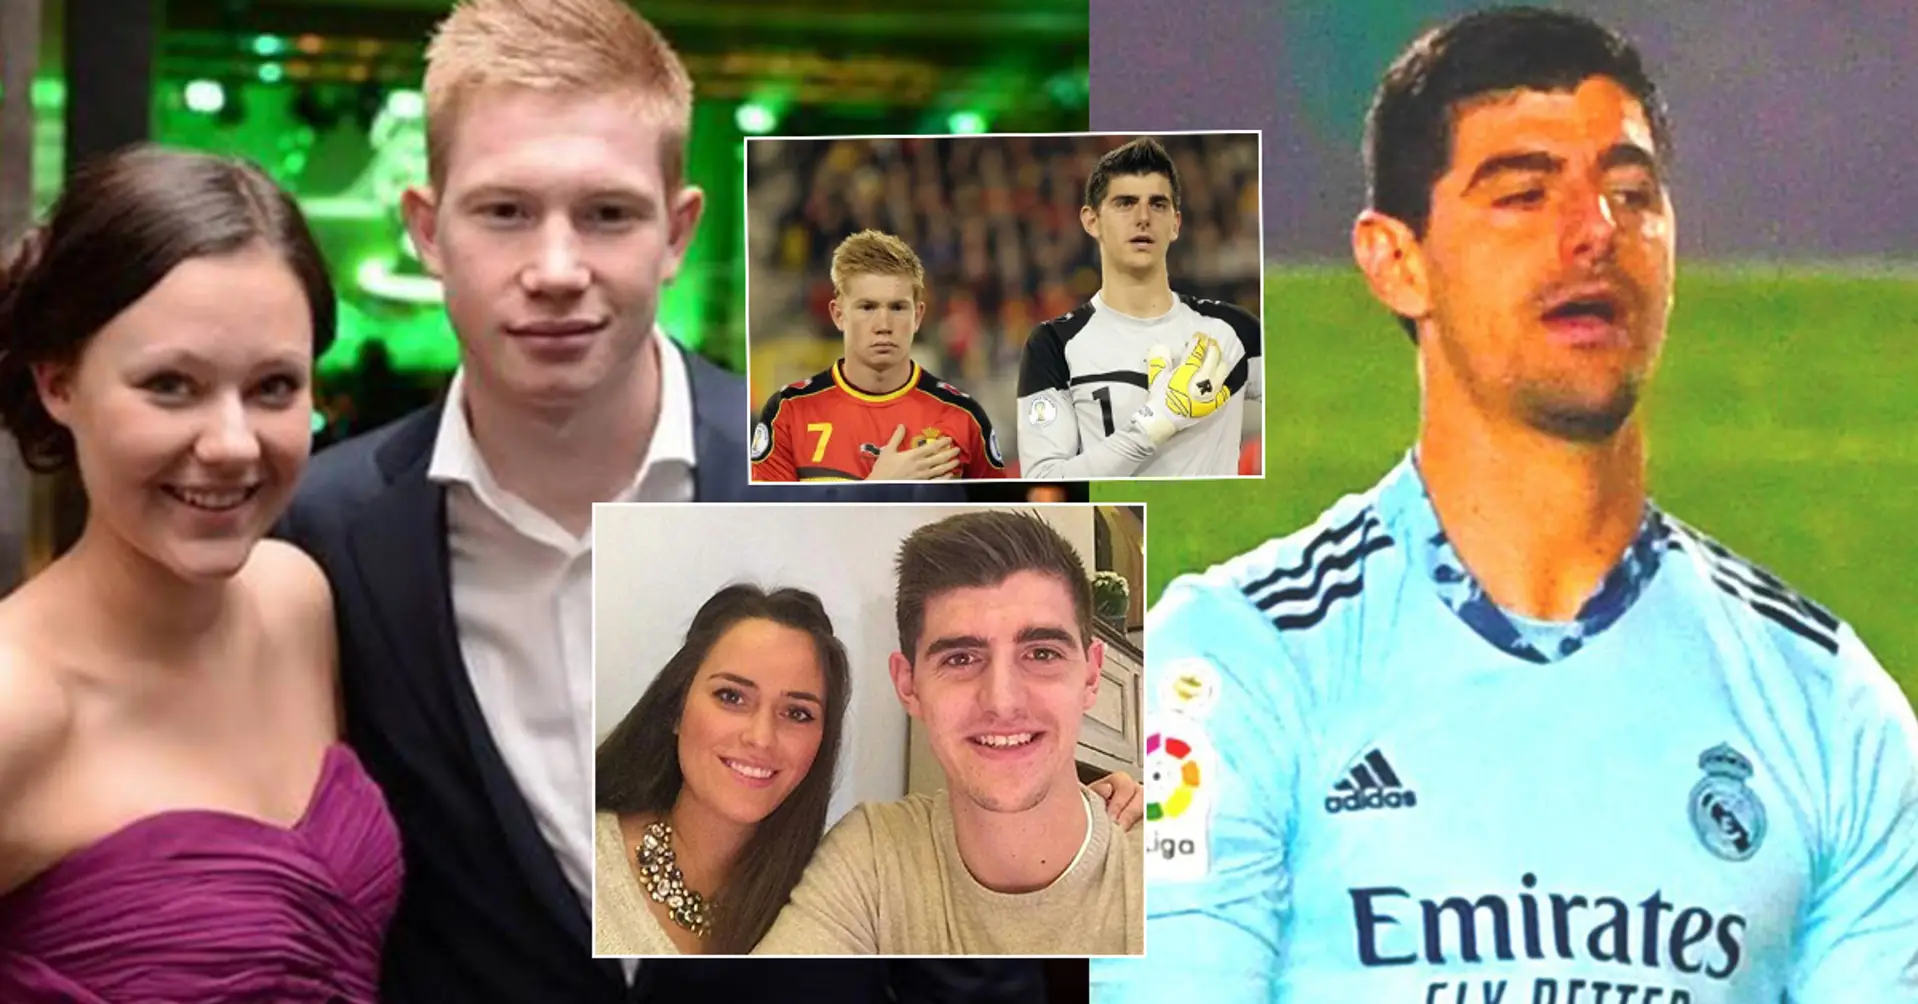 Why are Kevin de Bruyne and Courtois enemies? Image Credits:- Tribuna.